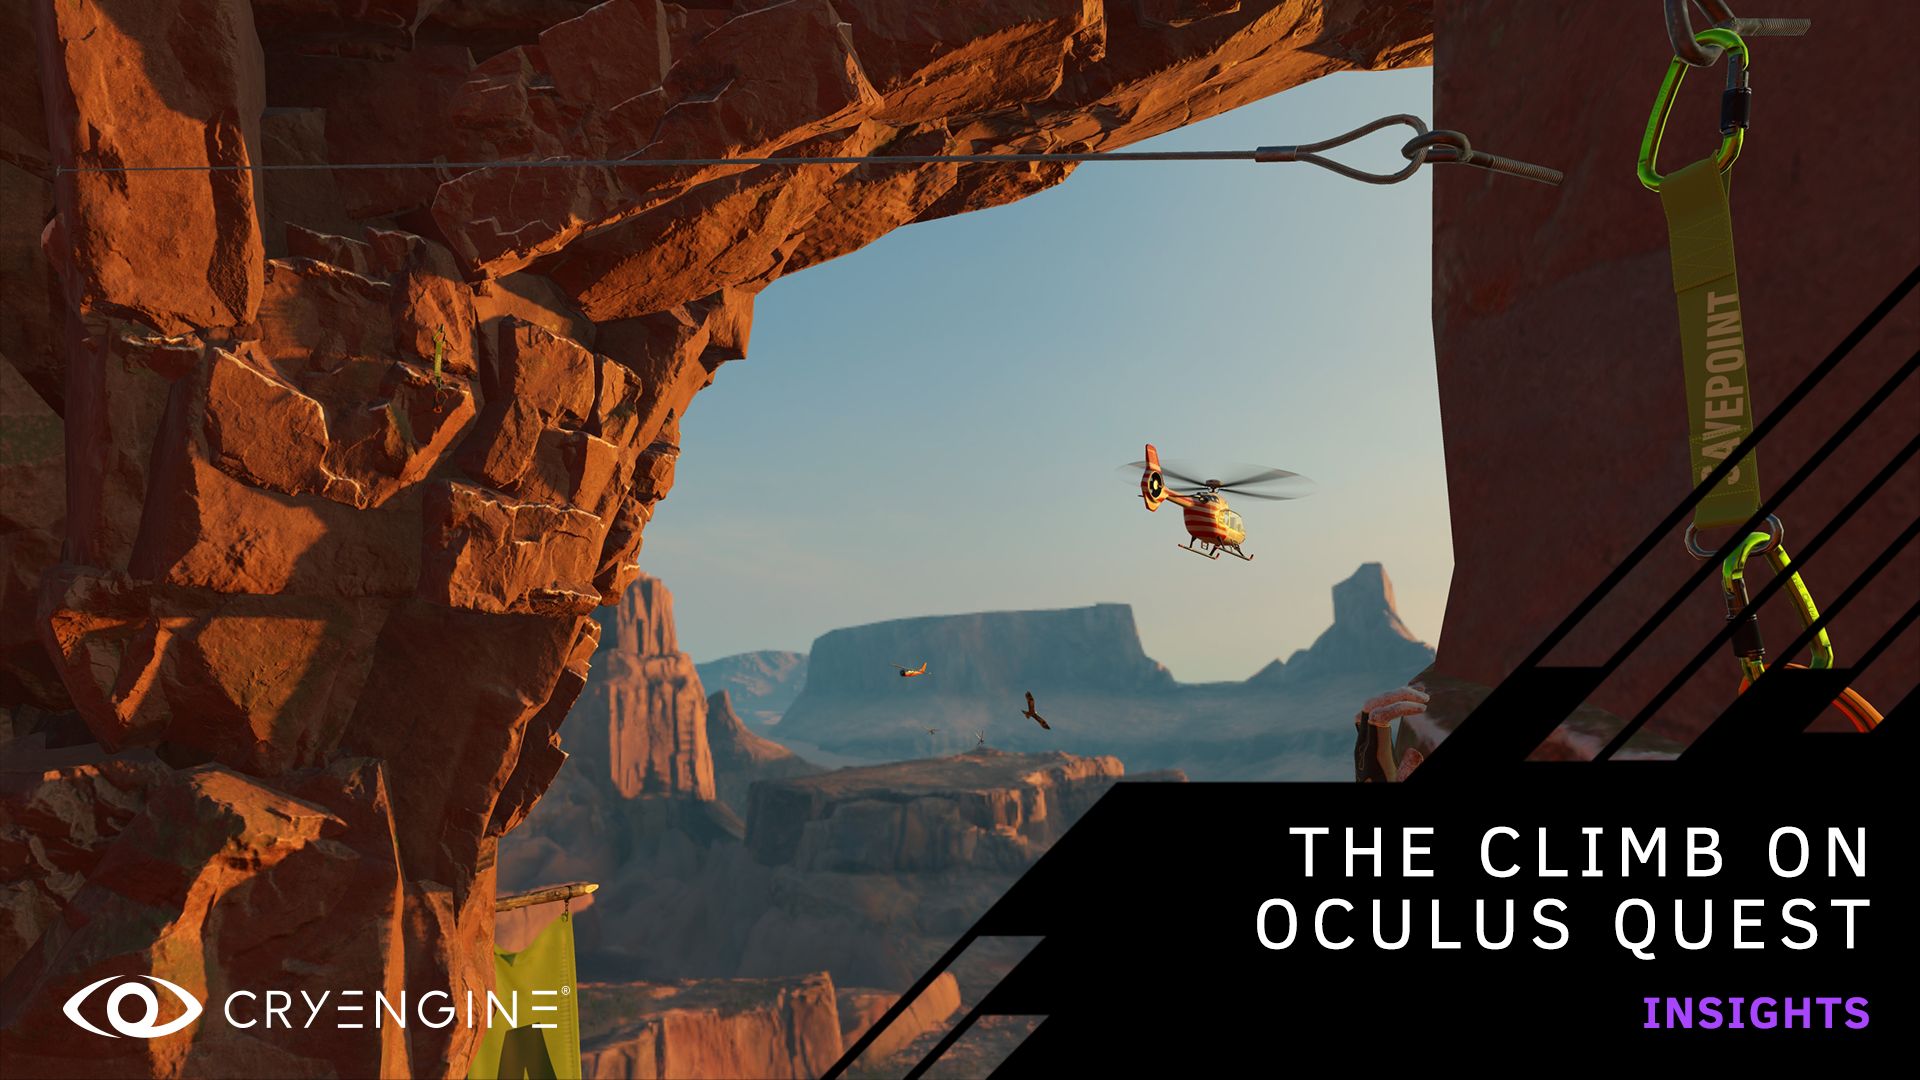 A difficult game about climbing читы. The Climb 2 Oculus Quest 2. Climb 2 VR Oculus. The Climb игра ВР. [VR Oculus Quest/Quest 2] the Climb.